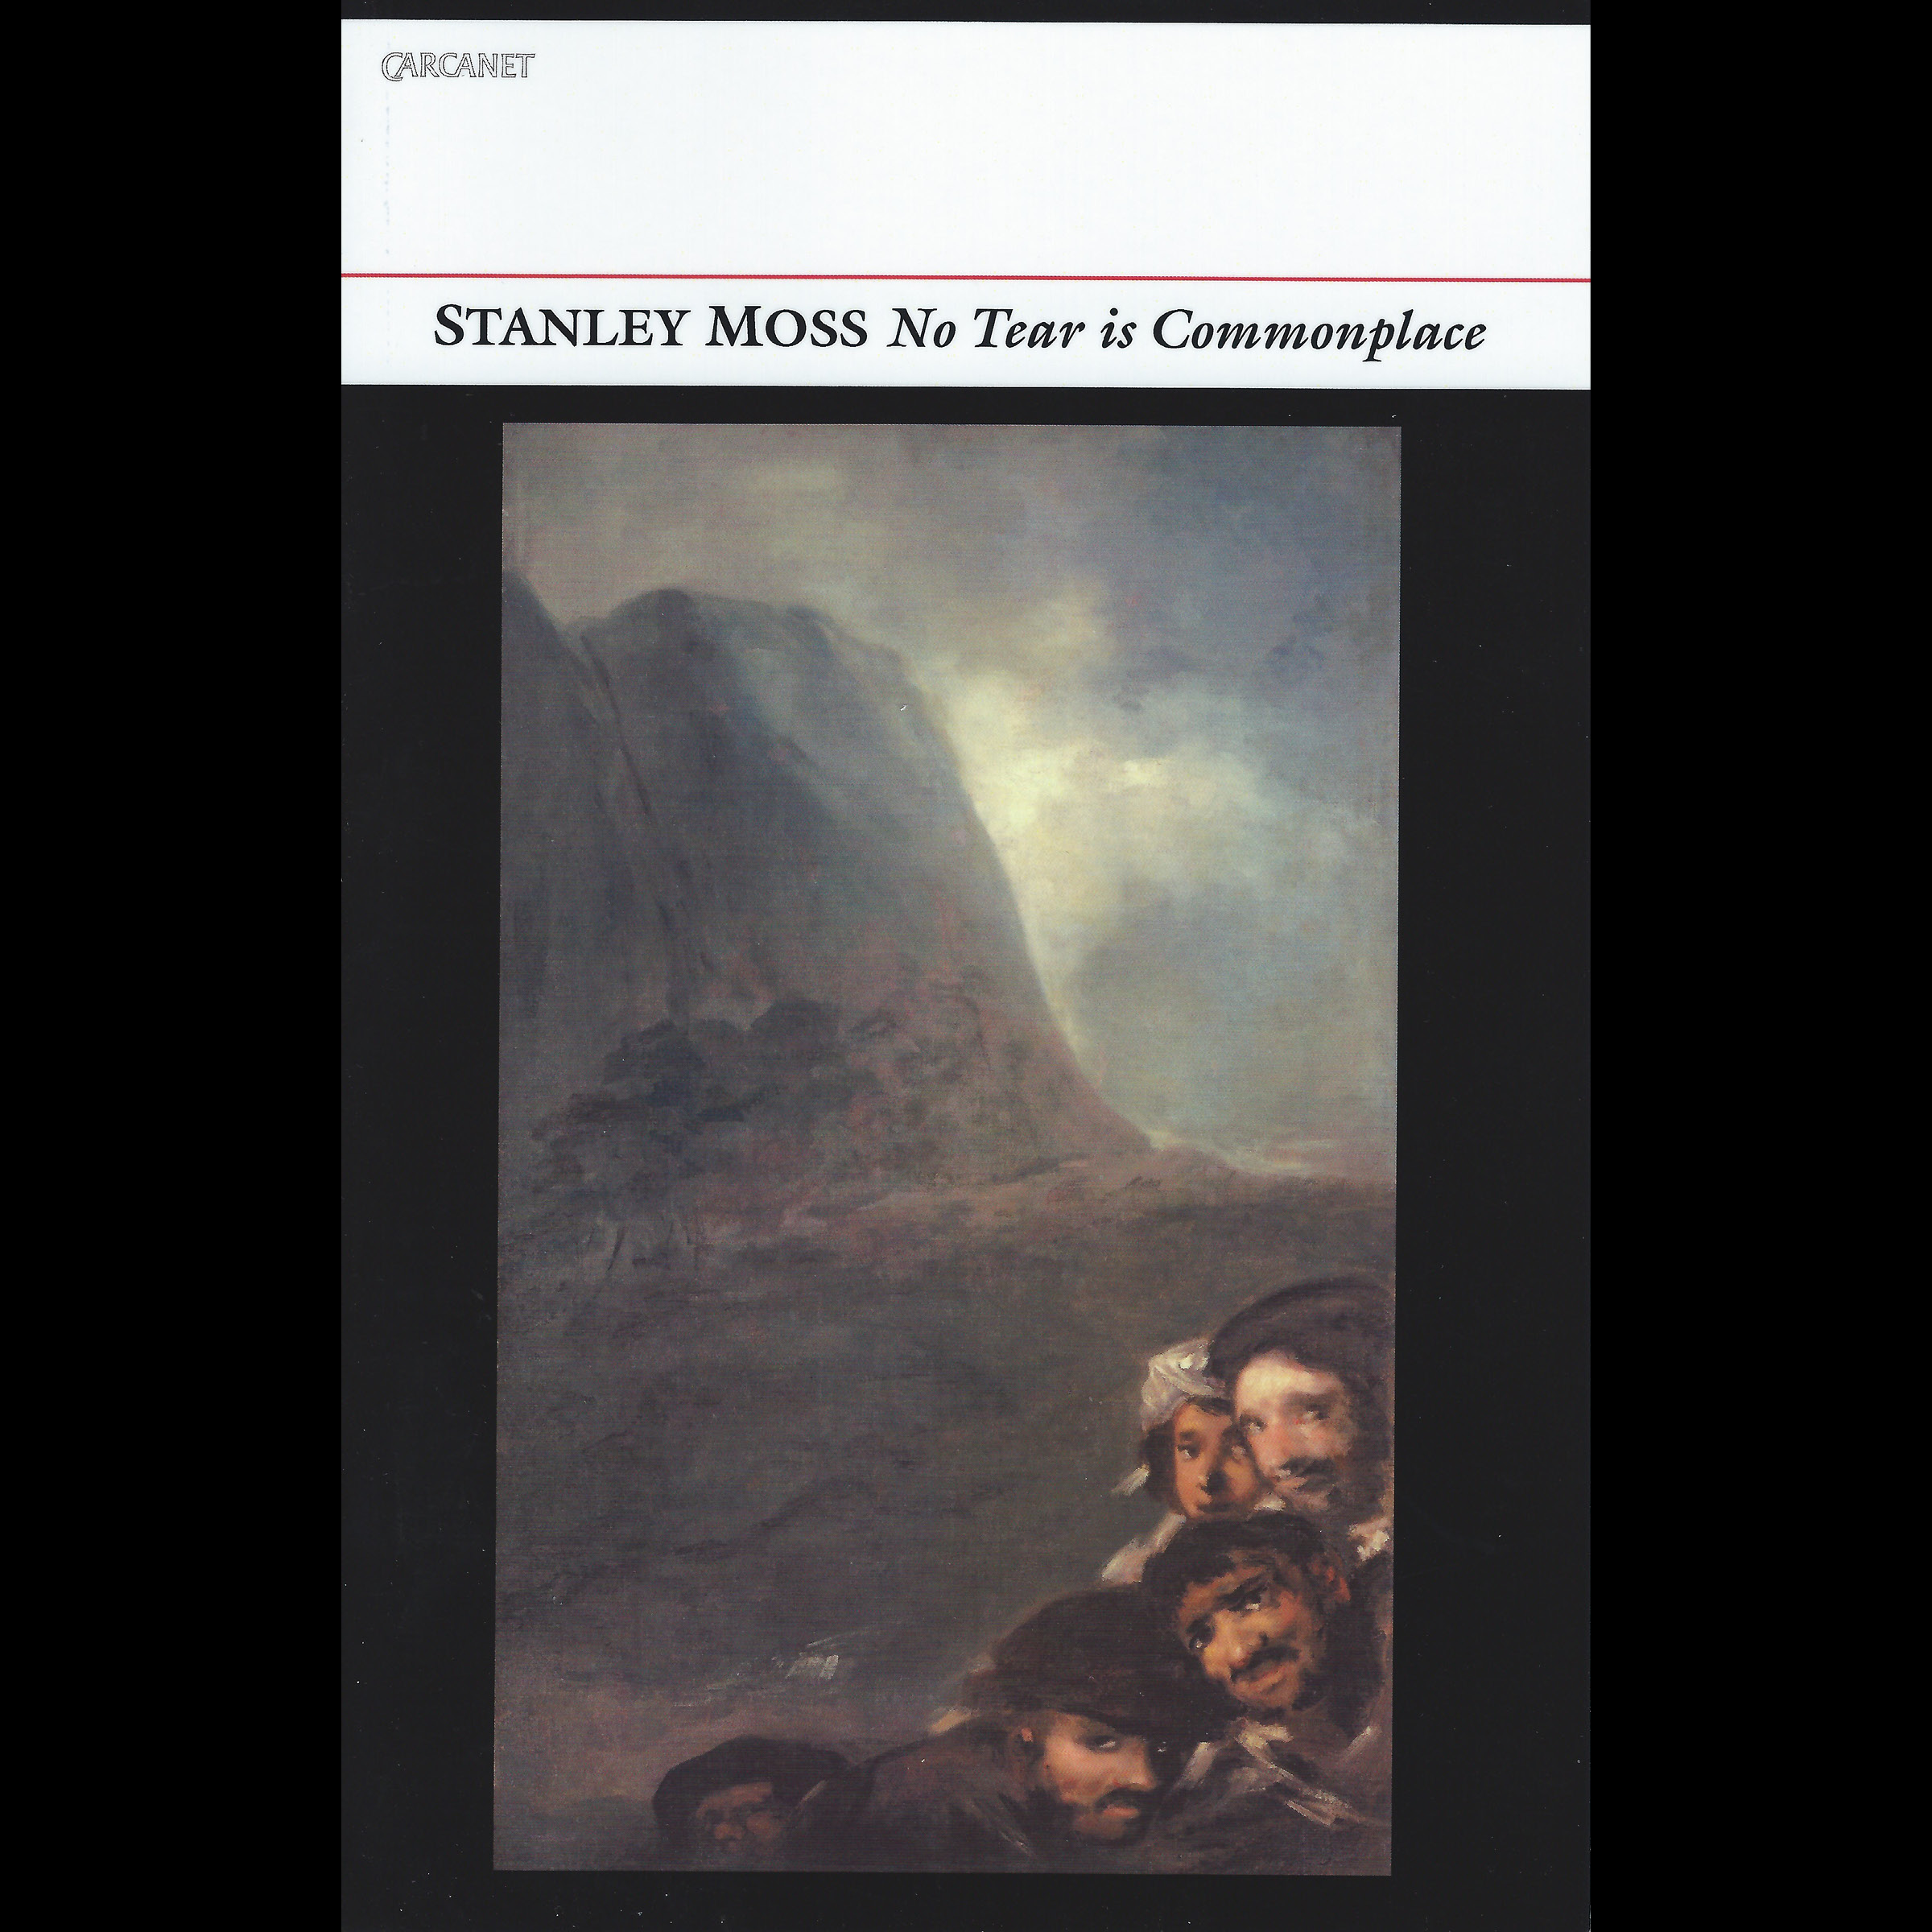 No Tear Is Commonplace (Carcanet, 2014)